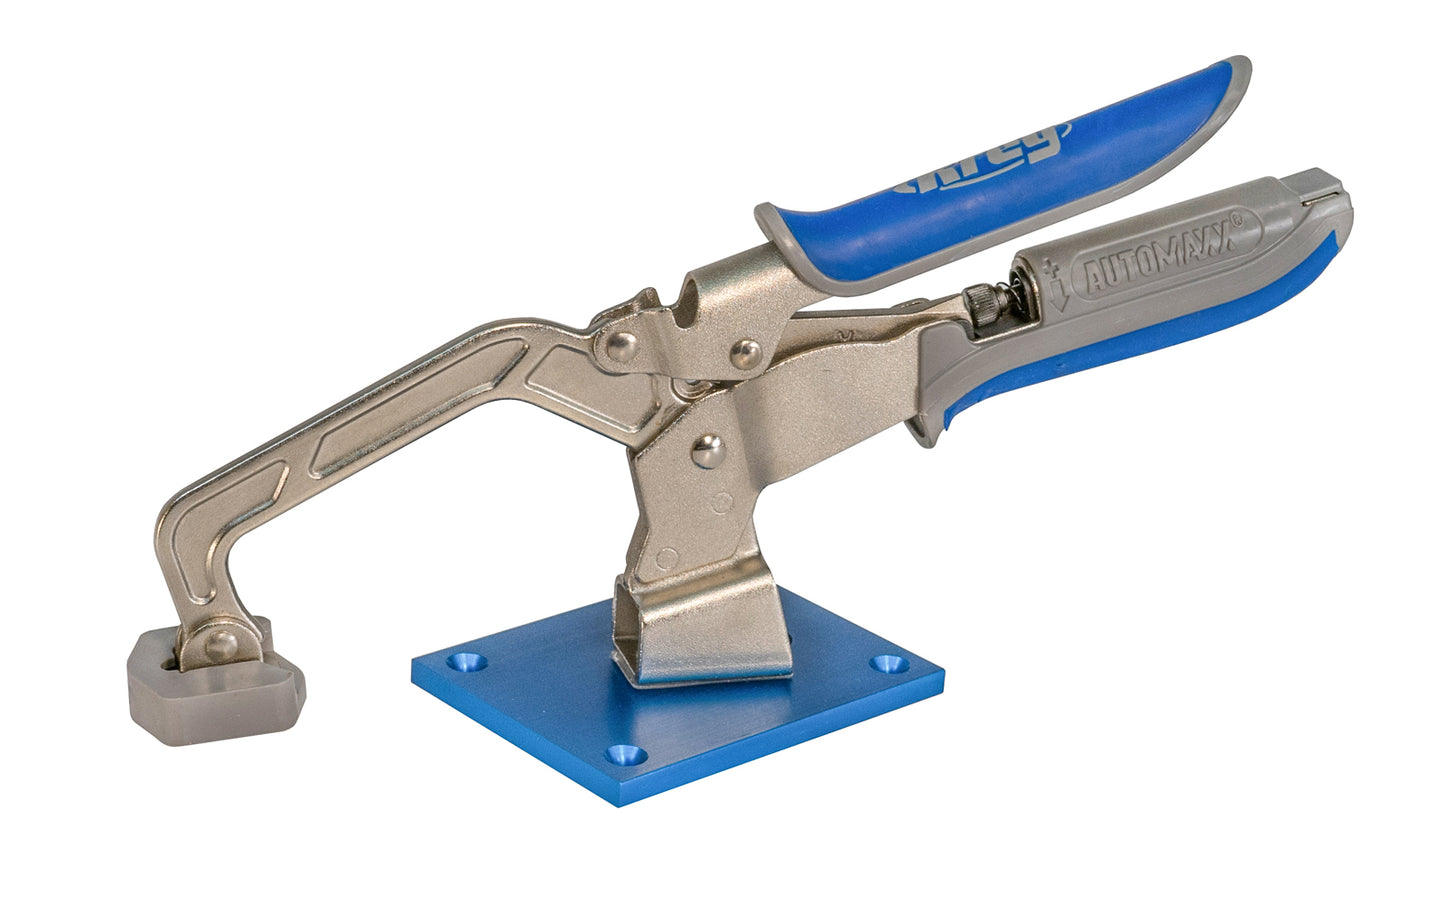 Create flush pocket hole joints with system - A versatile 360° benchtop clamping station - Model No. KBC3-SYS - 3-1/4" Deep Reach - Includes 3" (76mm) bench clamp, clamp plate, & mounting hardware. Clamp features an adjustment knob for built-in pressure control. Kreg Toggle Clamp System. Use on workbench, sawhorse, etc